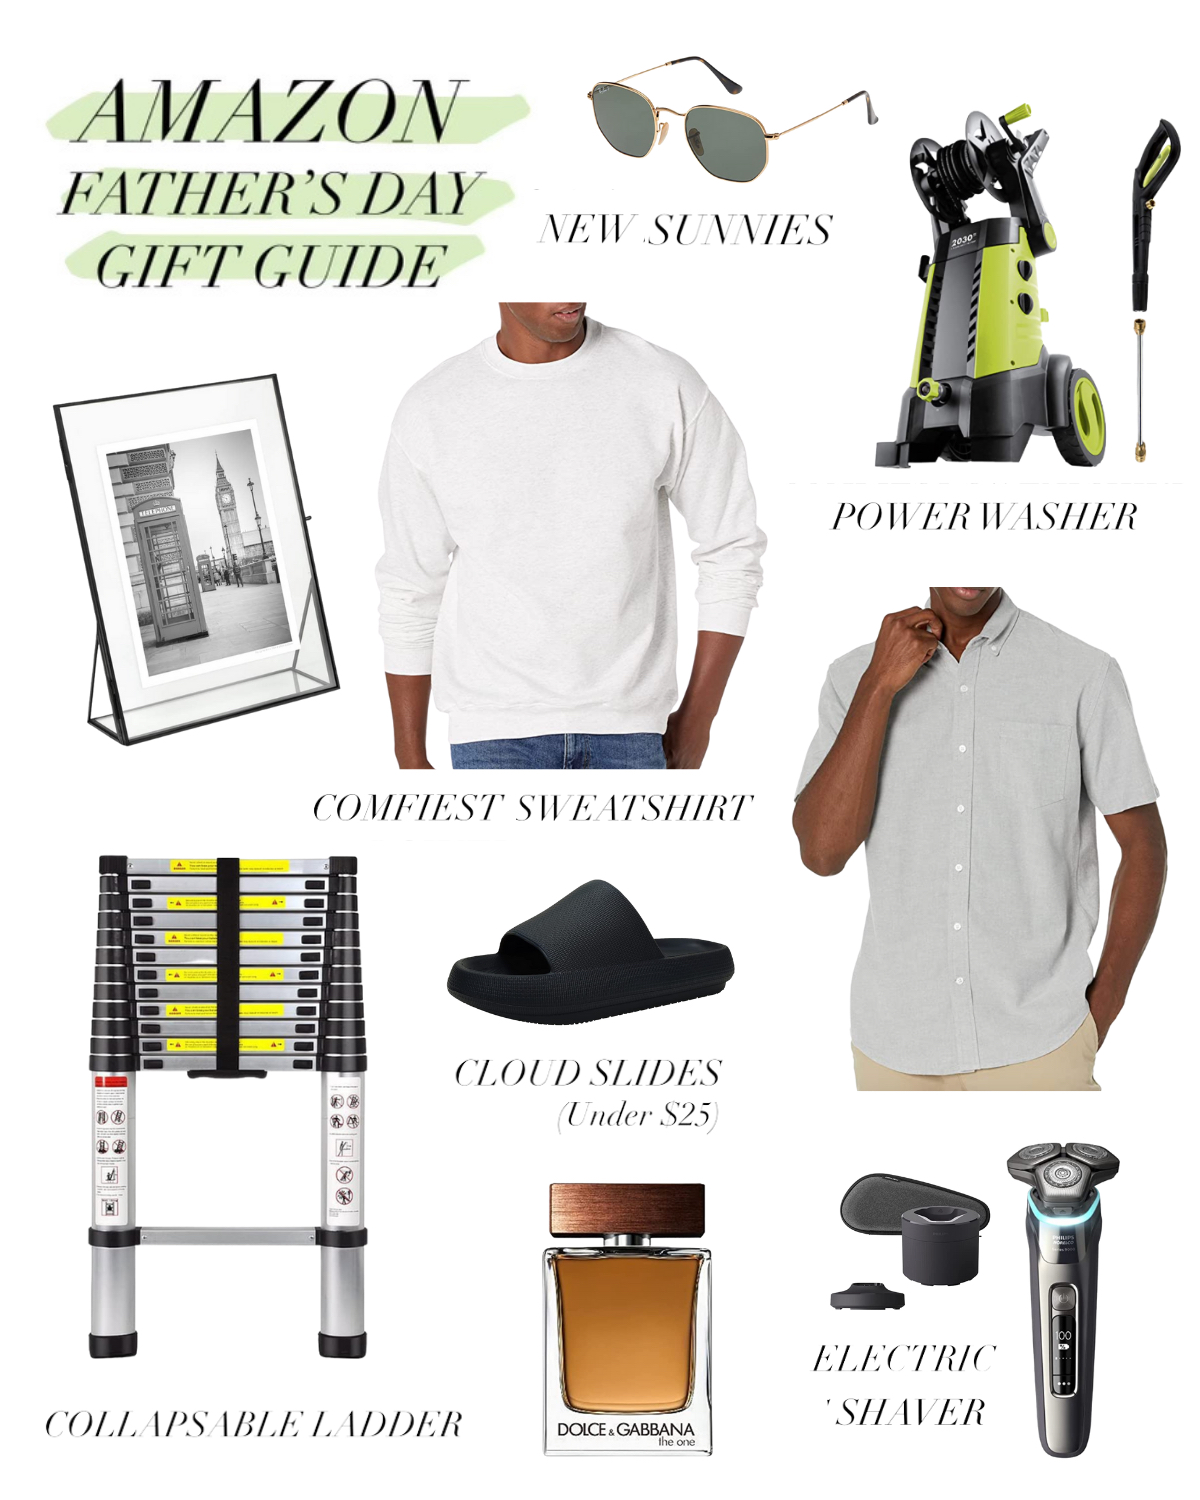 amazon gift guide, fathers day gift ideas, fathers day gift guide, fathers day, amazon, mens clothing, cloud slides, power washer, electric shaver, ladder, cologne, ray bans, sunglasses.